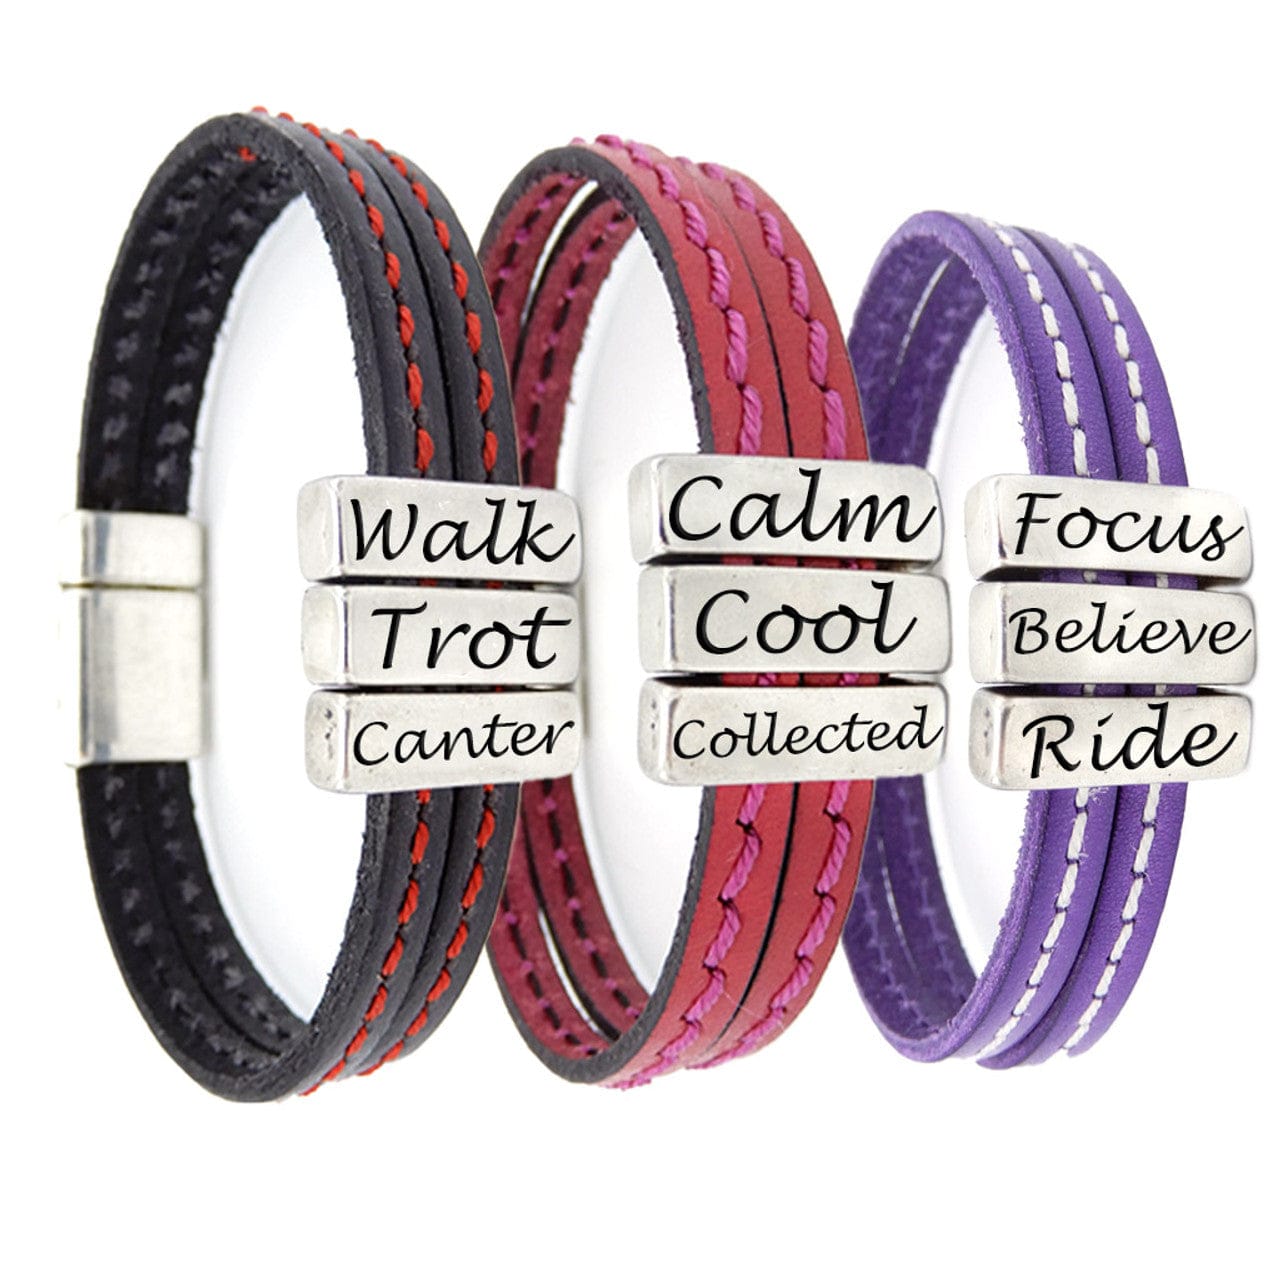 LILO Lilo- Bracelet Youth “Wynne” equestrian team apparel online tack store mobile tack store custom farm apparel custom show stable clothing equestrian lifestyle horse show clothing riding clothes horses equestrian tack store